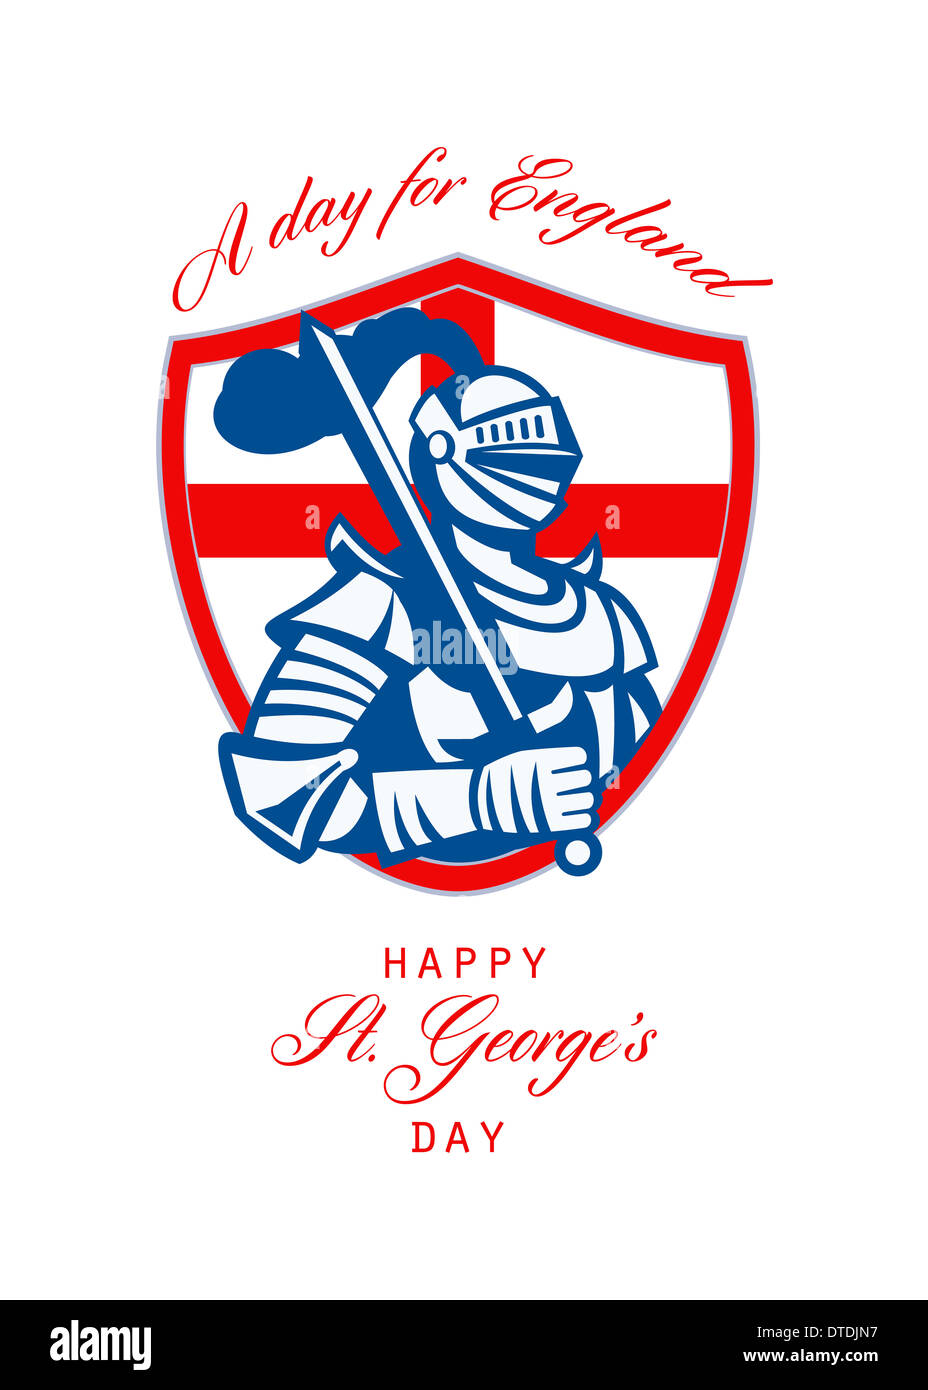 Poster greeting card Illustration of knight in full armor with sword and shield with England English flag done in retro style with words Happy St. George's Day A Day for England. Stock Photo